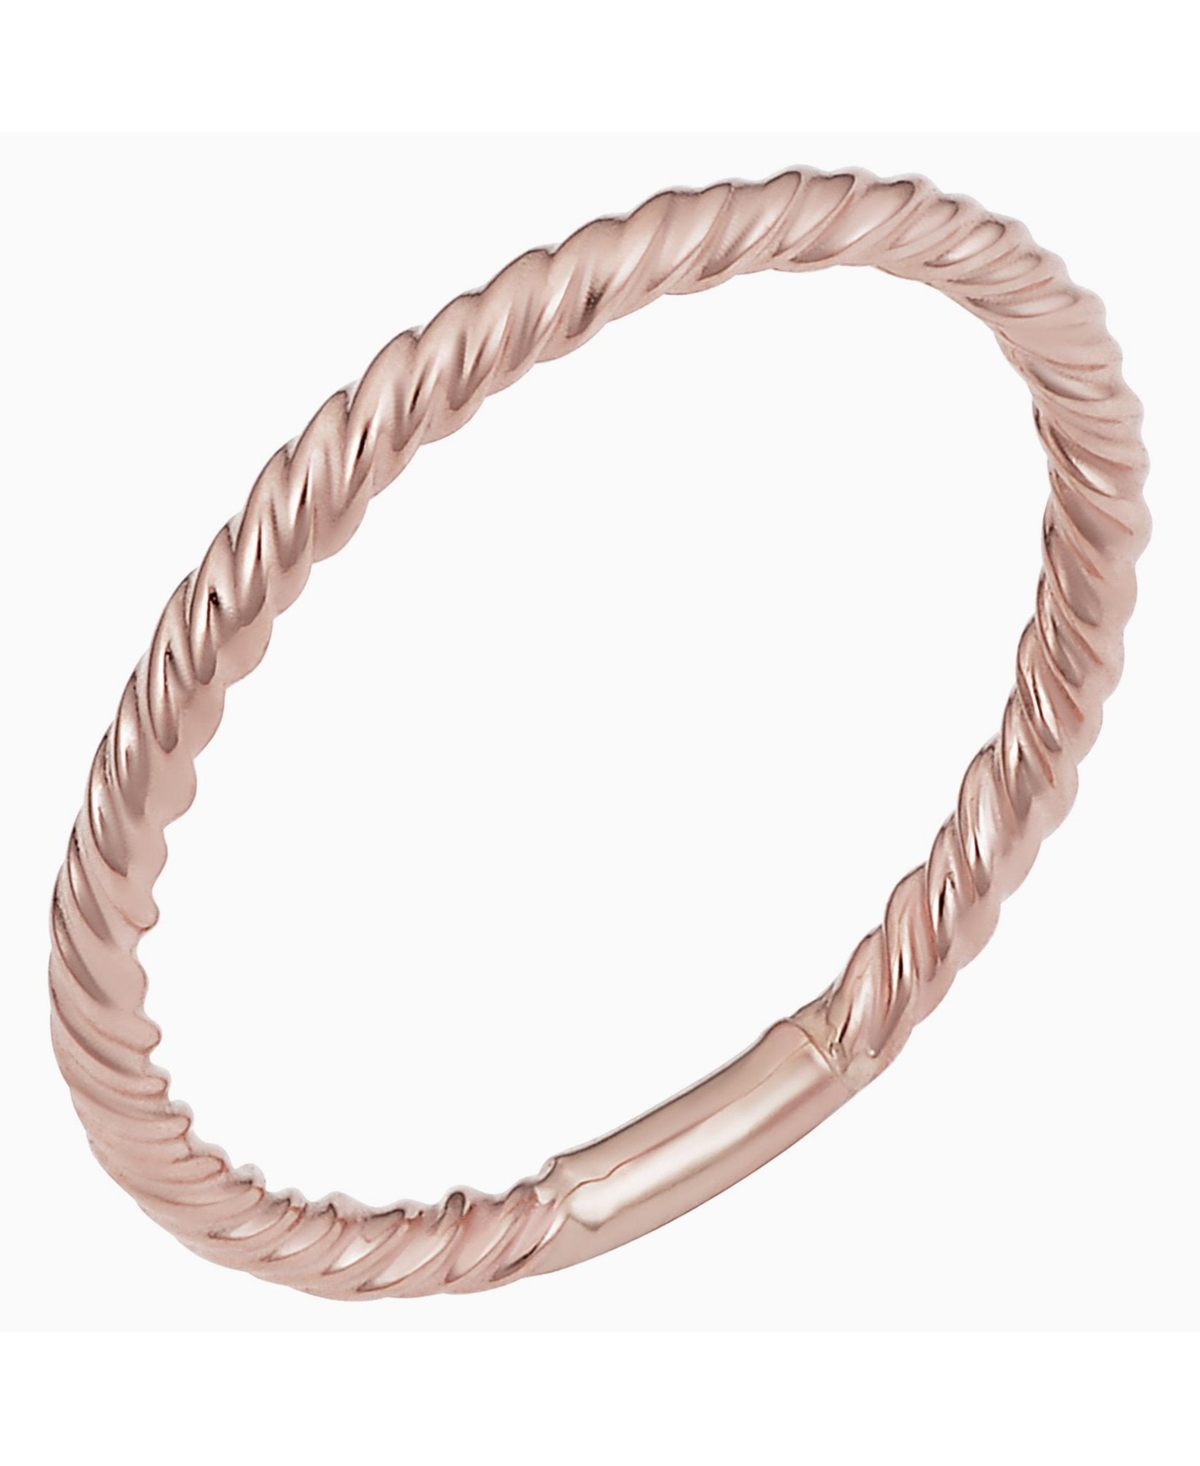 ORADINA DAWN RING IN 14K YELLOW GOLD, 14K WHITE GOLD OR 14K ROSE GOLD- 5 INCHES